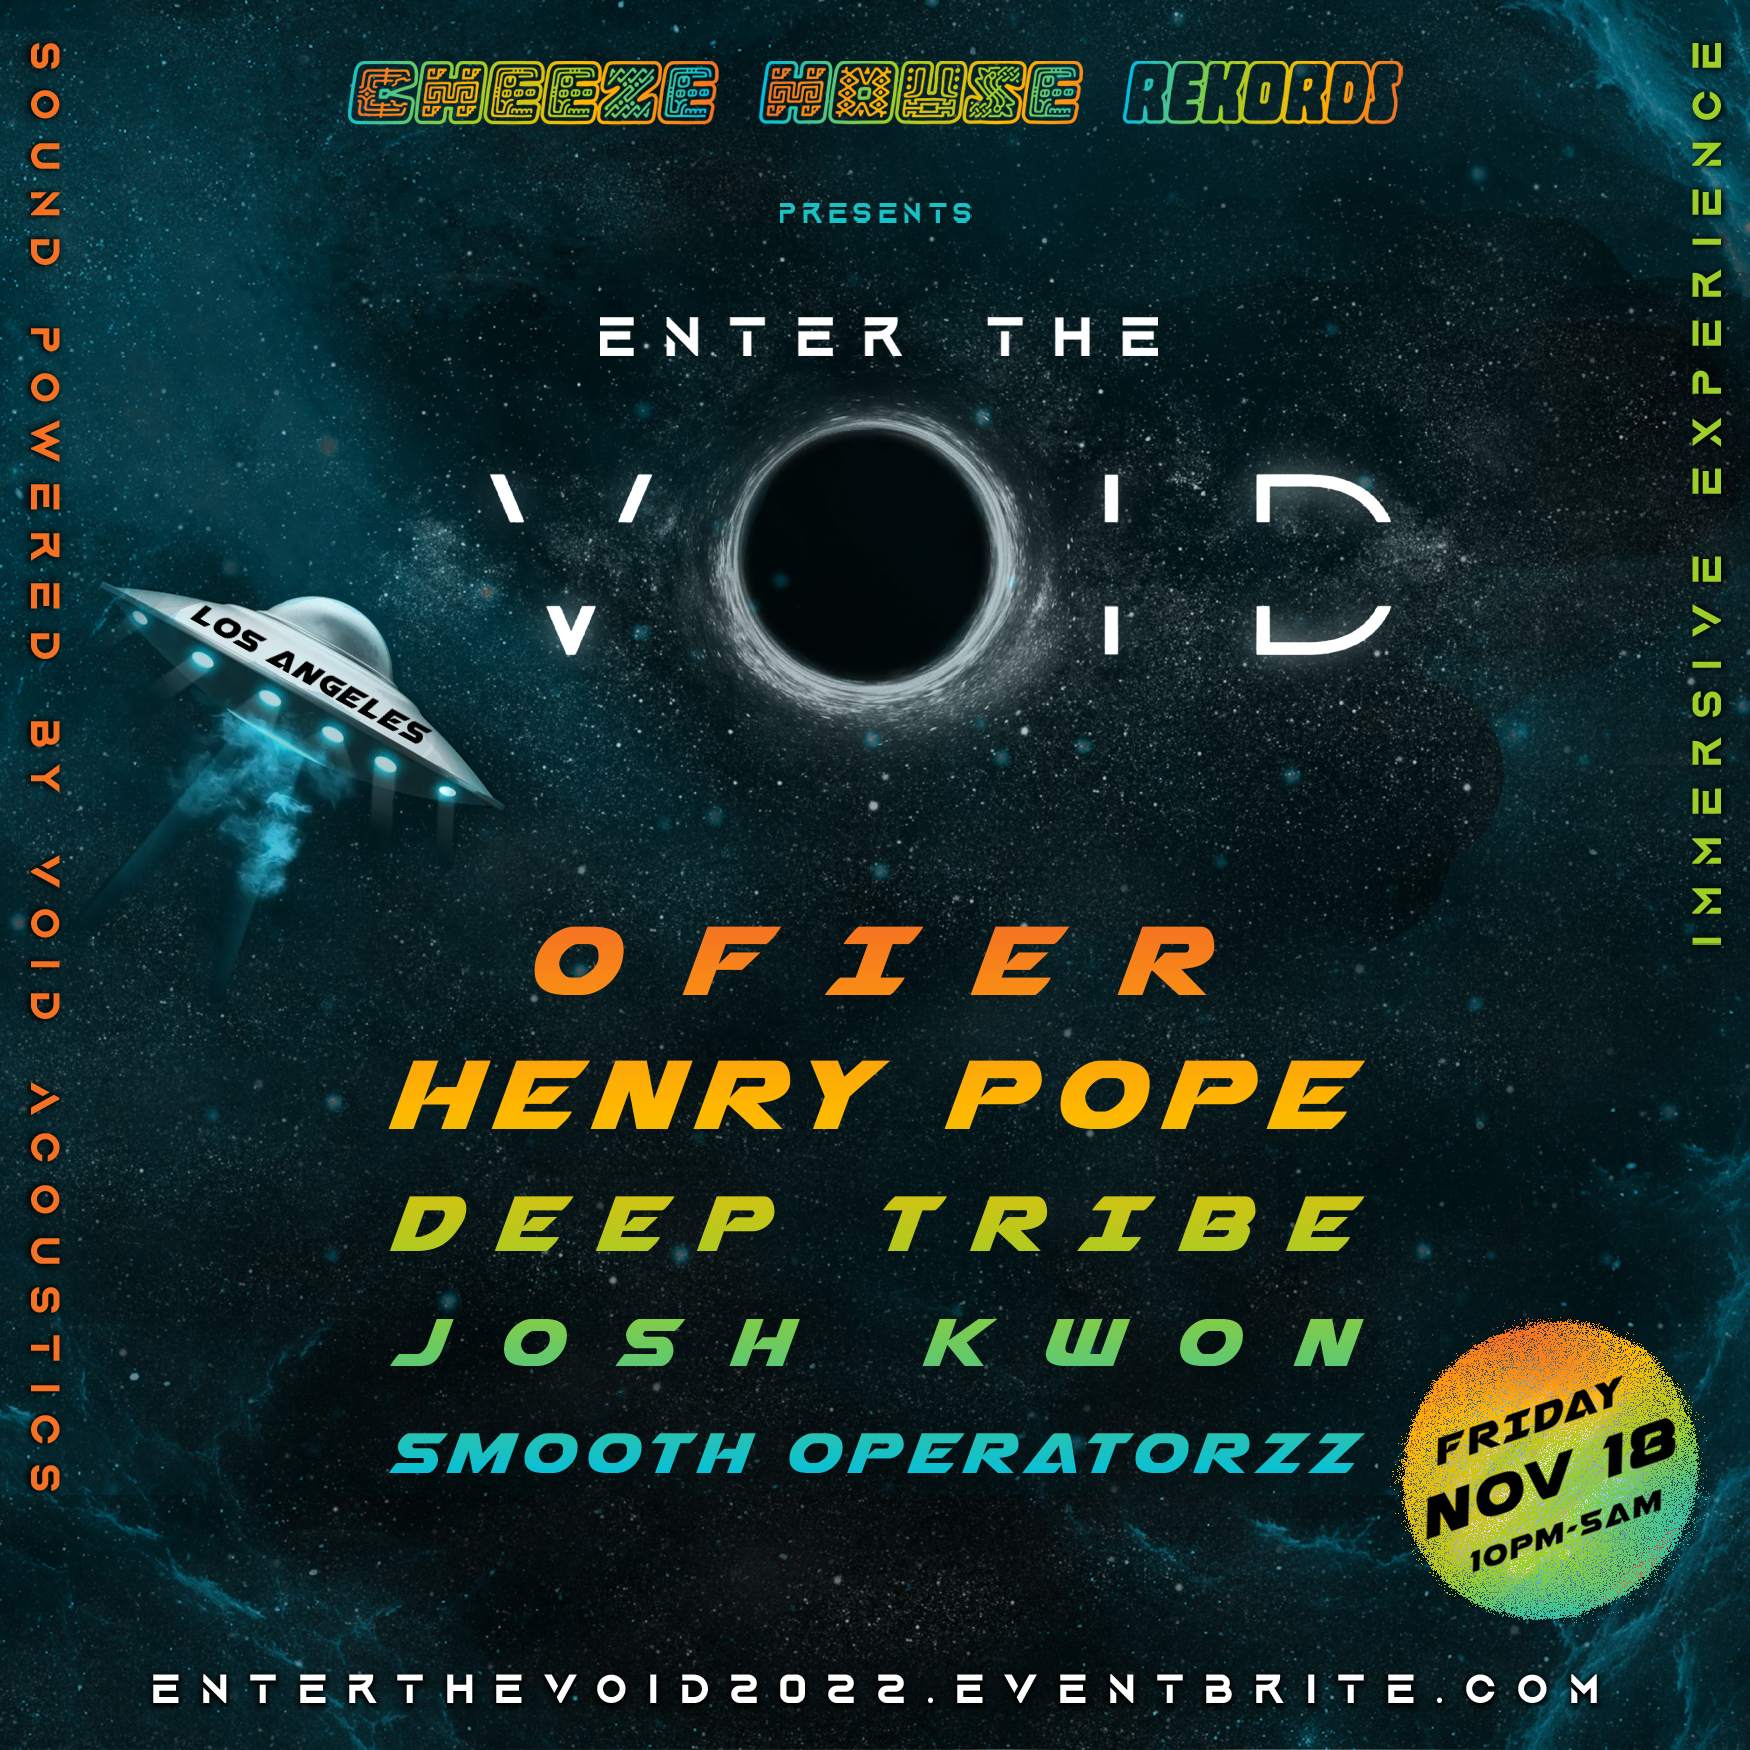 Enter the Void: Ofier, Henry Pope, Deep Tribe, Josh Kwon, Smooth Operatorzz - フライヤー表